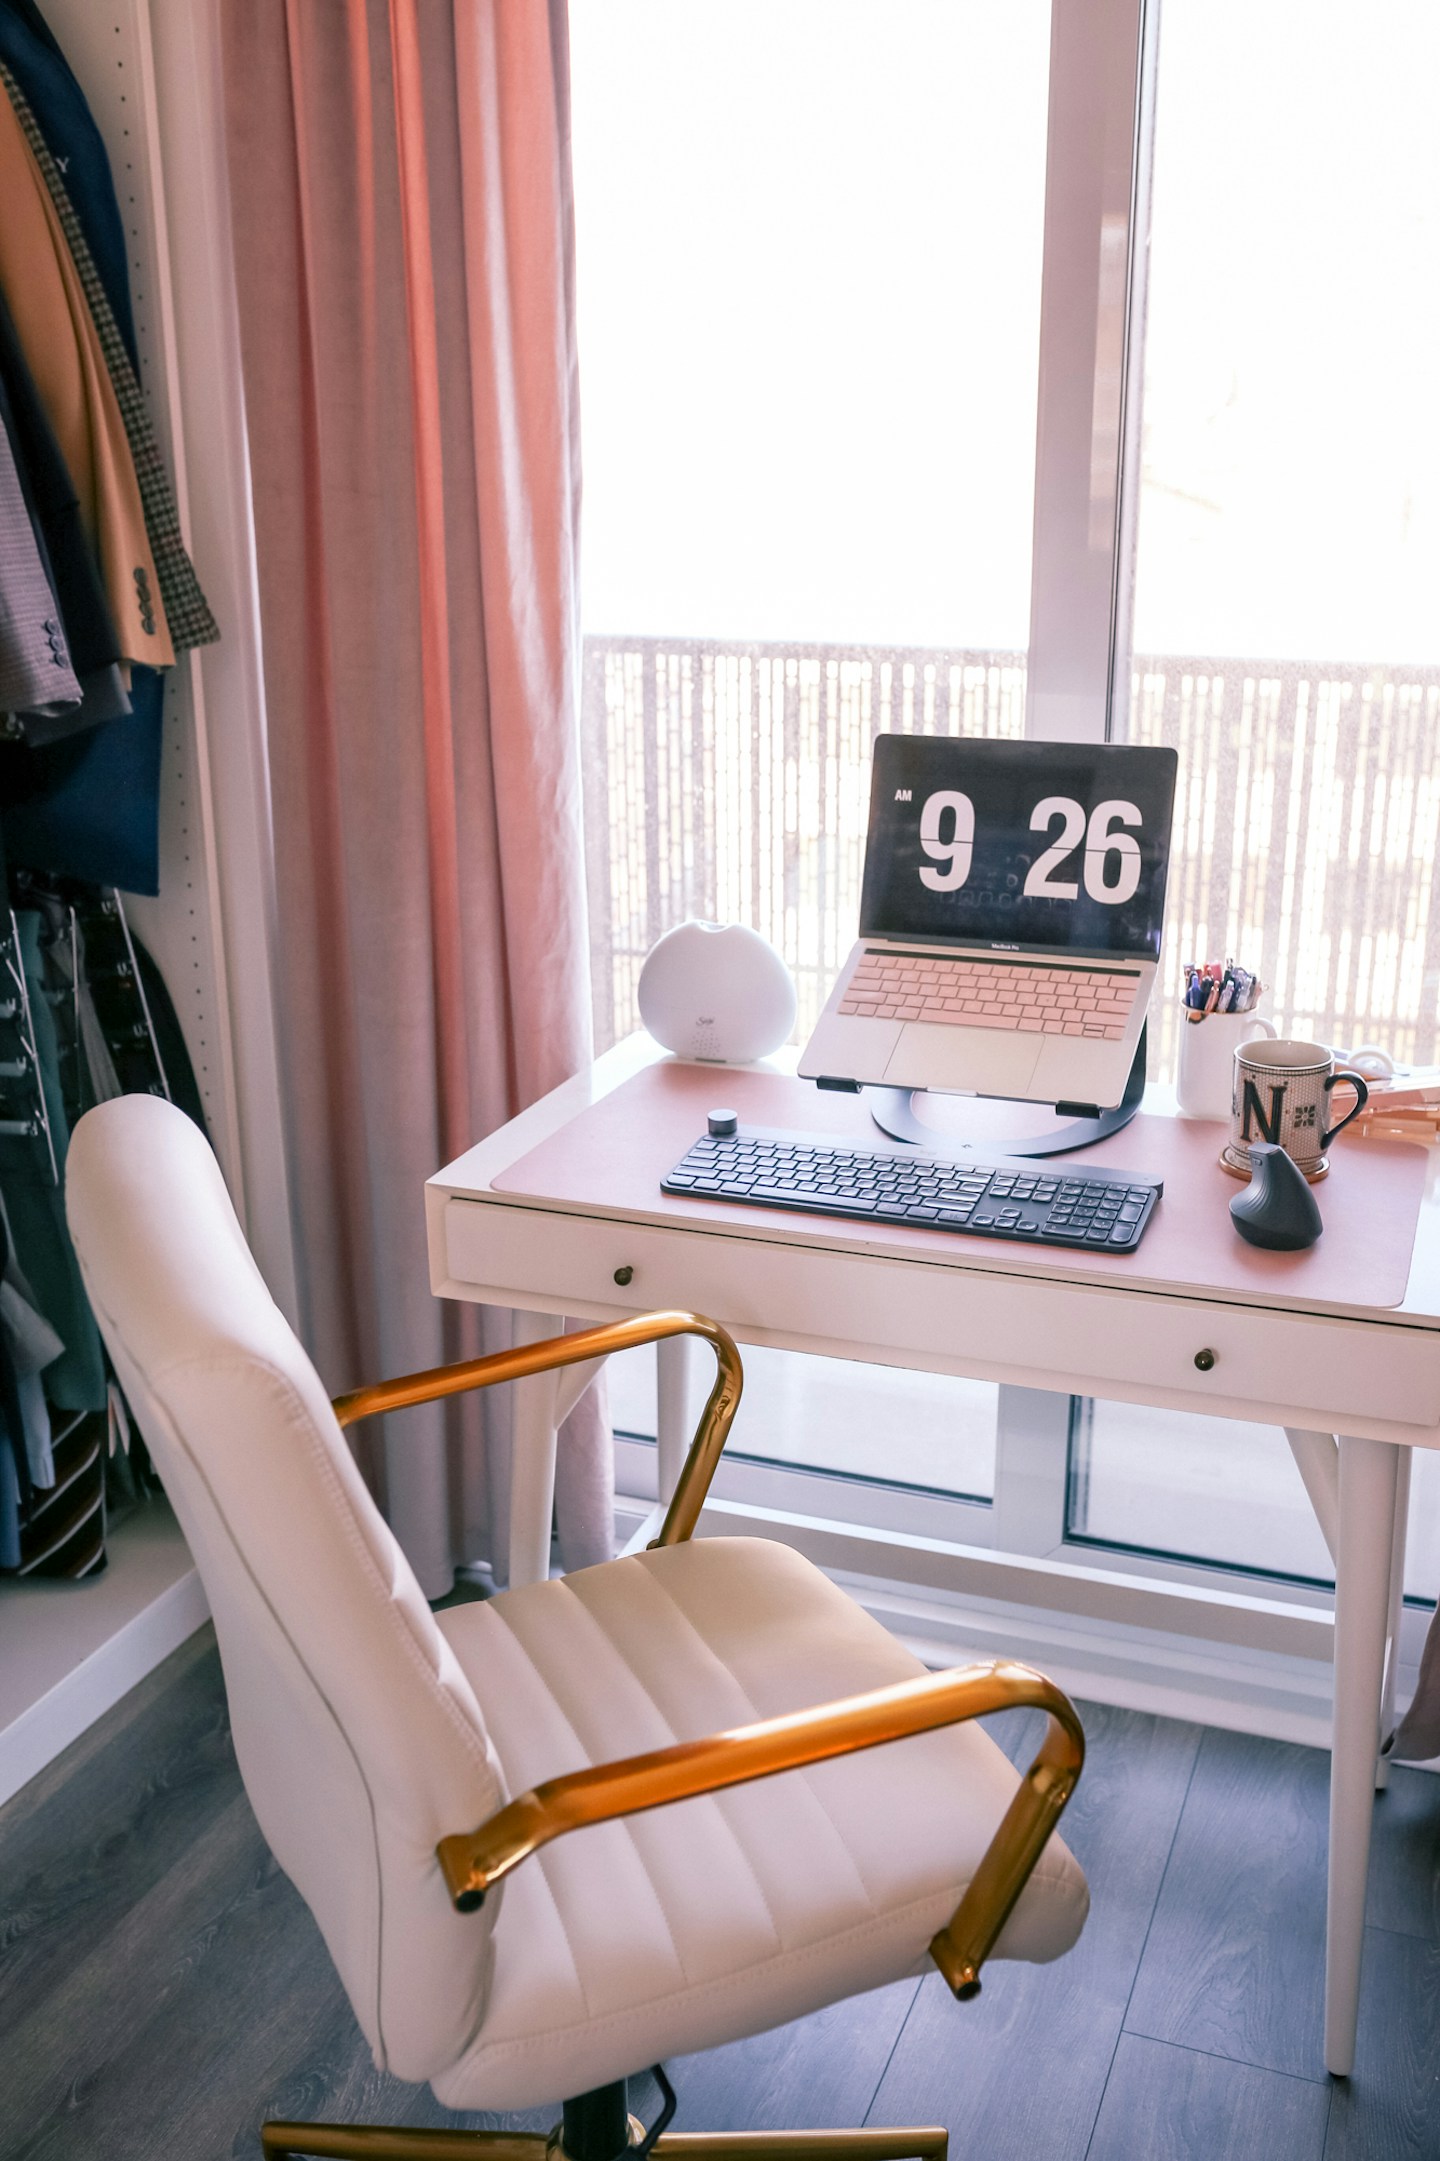 If you're working from home during self-isolation make sure to have a clean desk setup with a comfortable desk chair, sturdy desk and a laptop stand to be ergonomic.